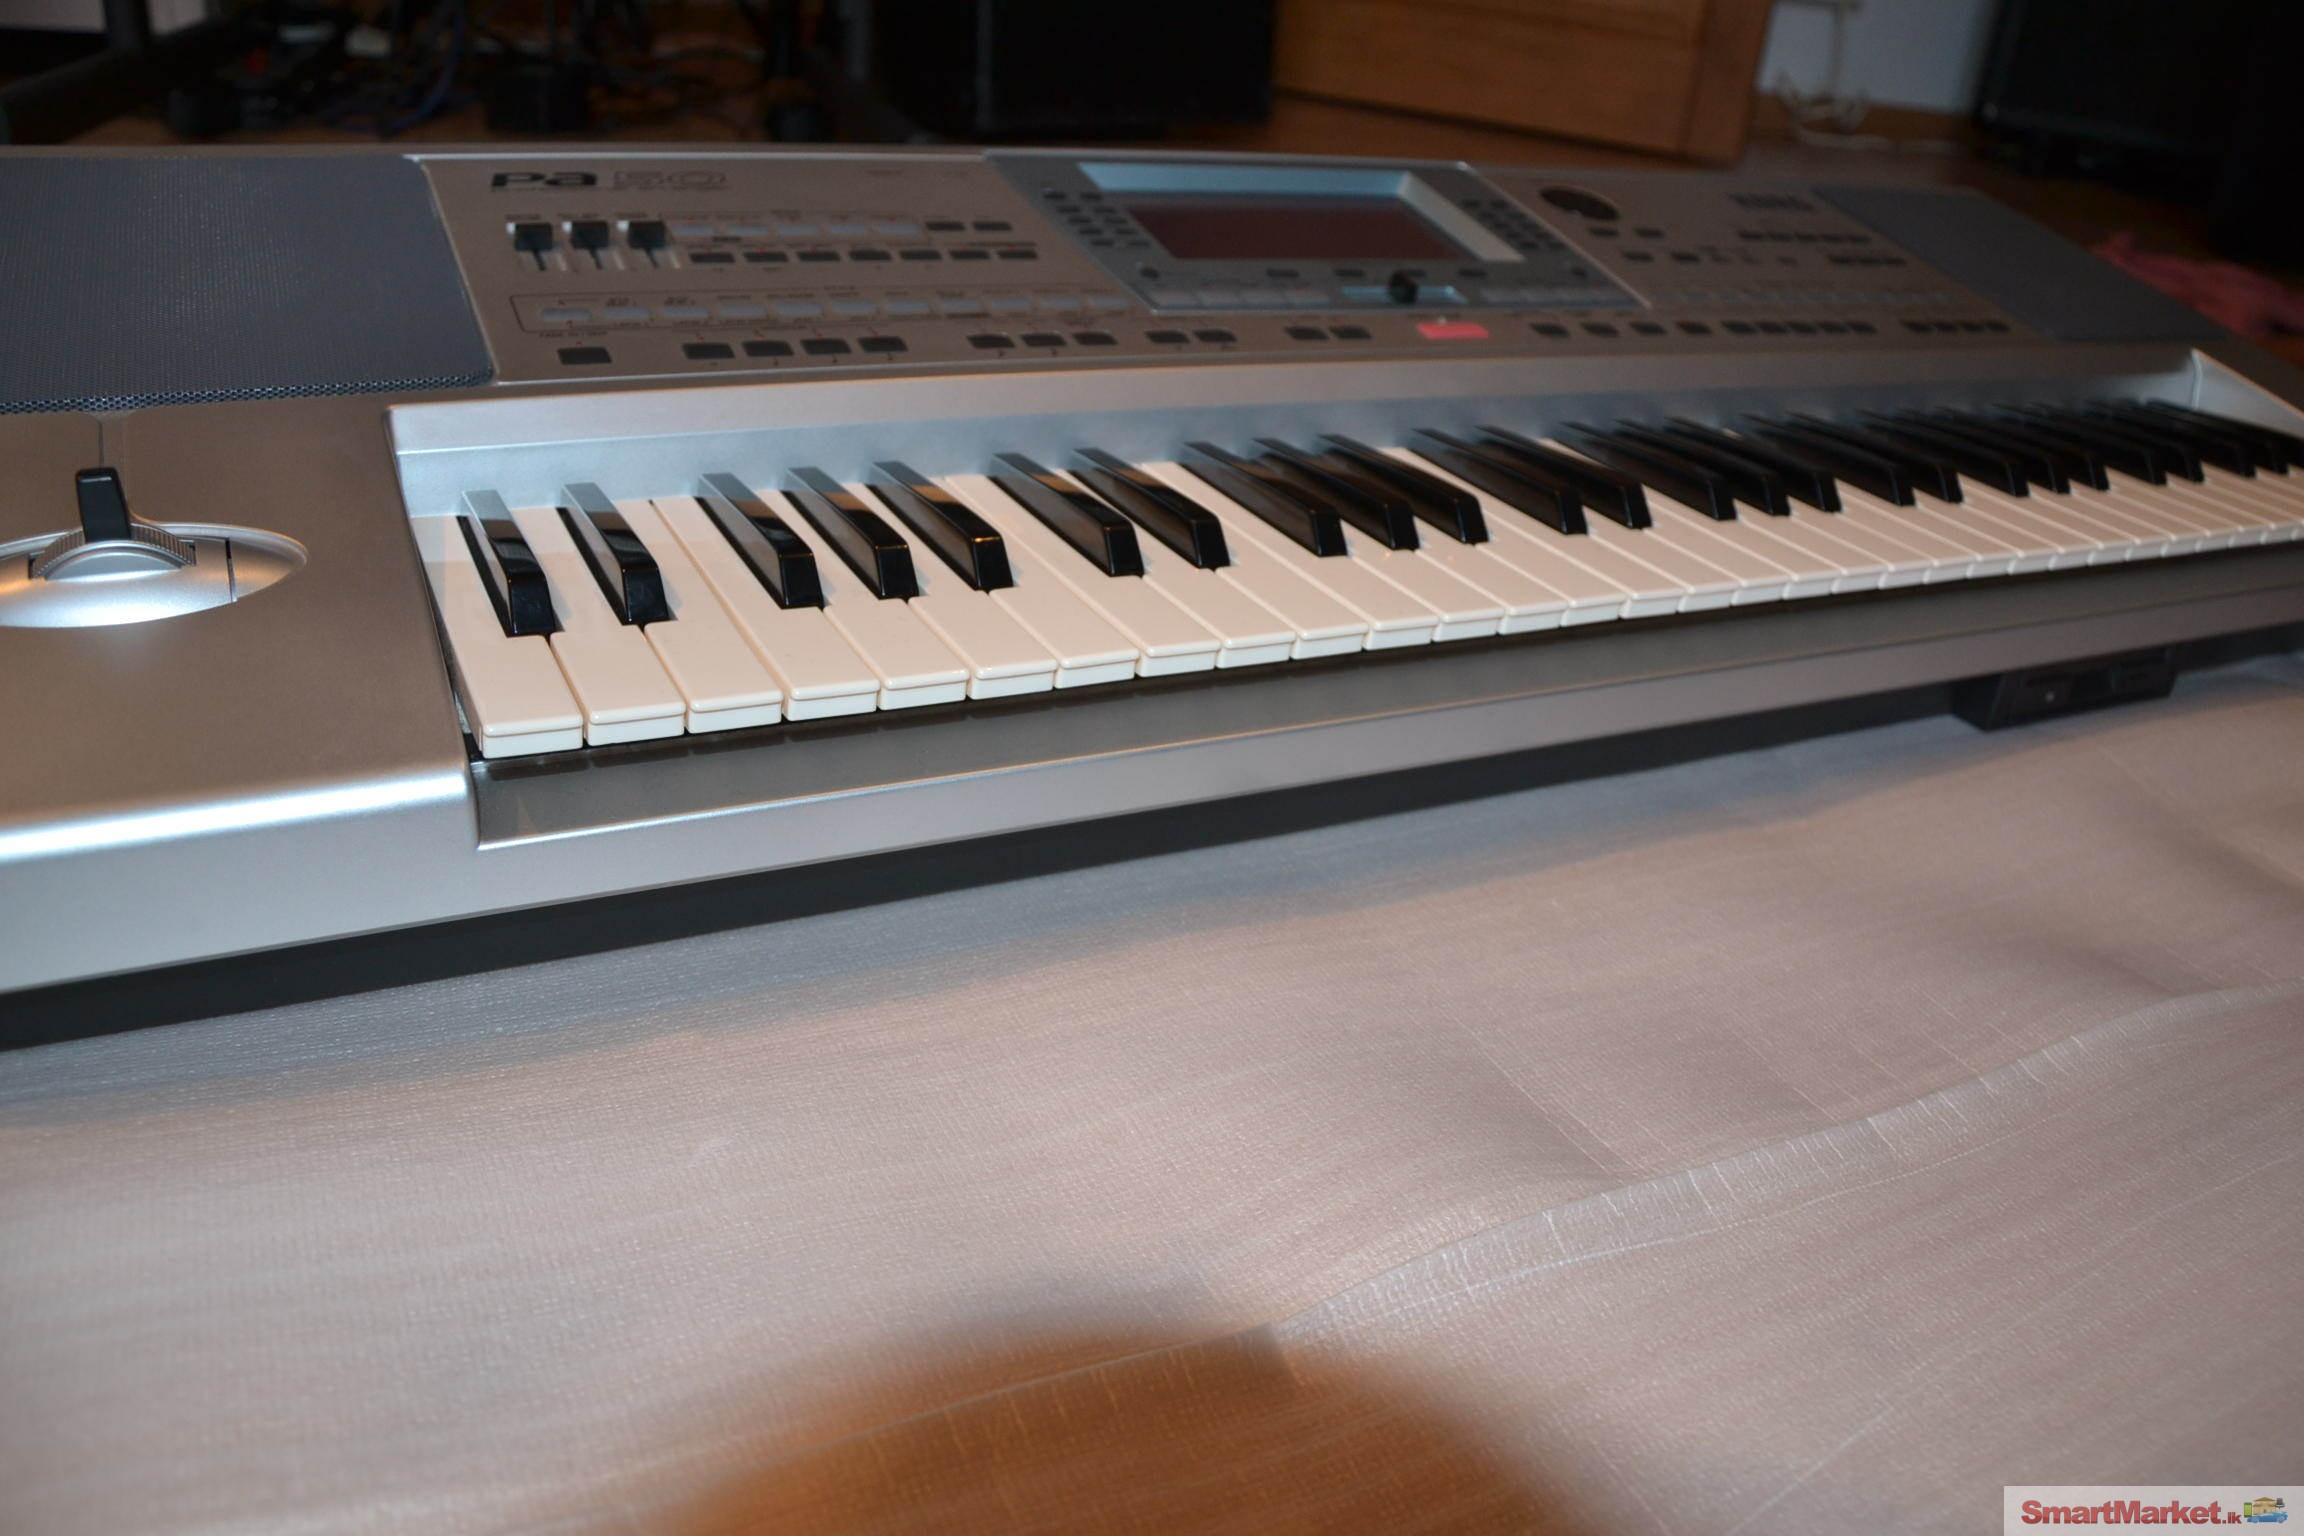 Korg pa 50 for sale